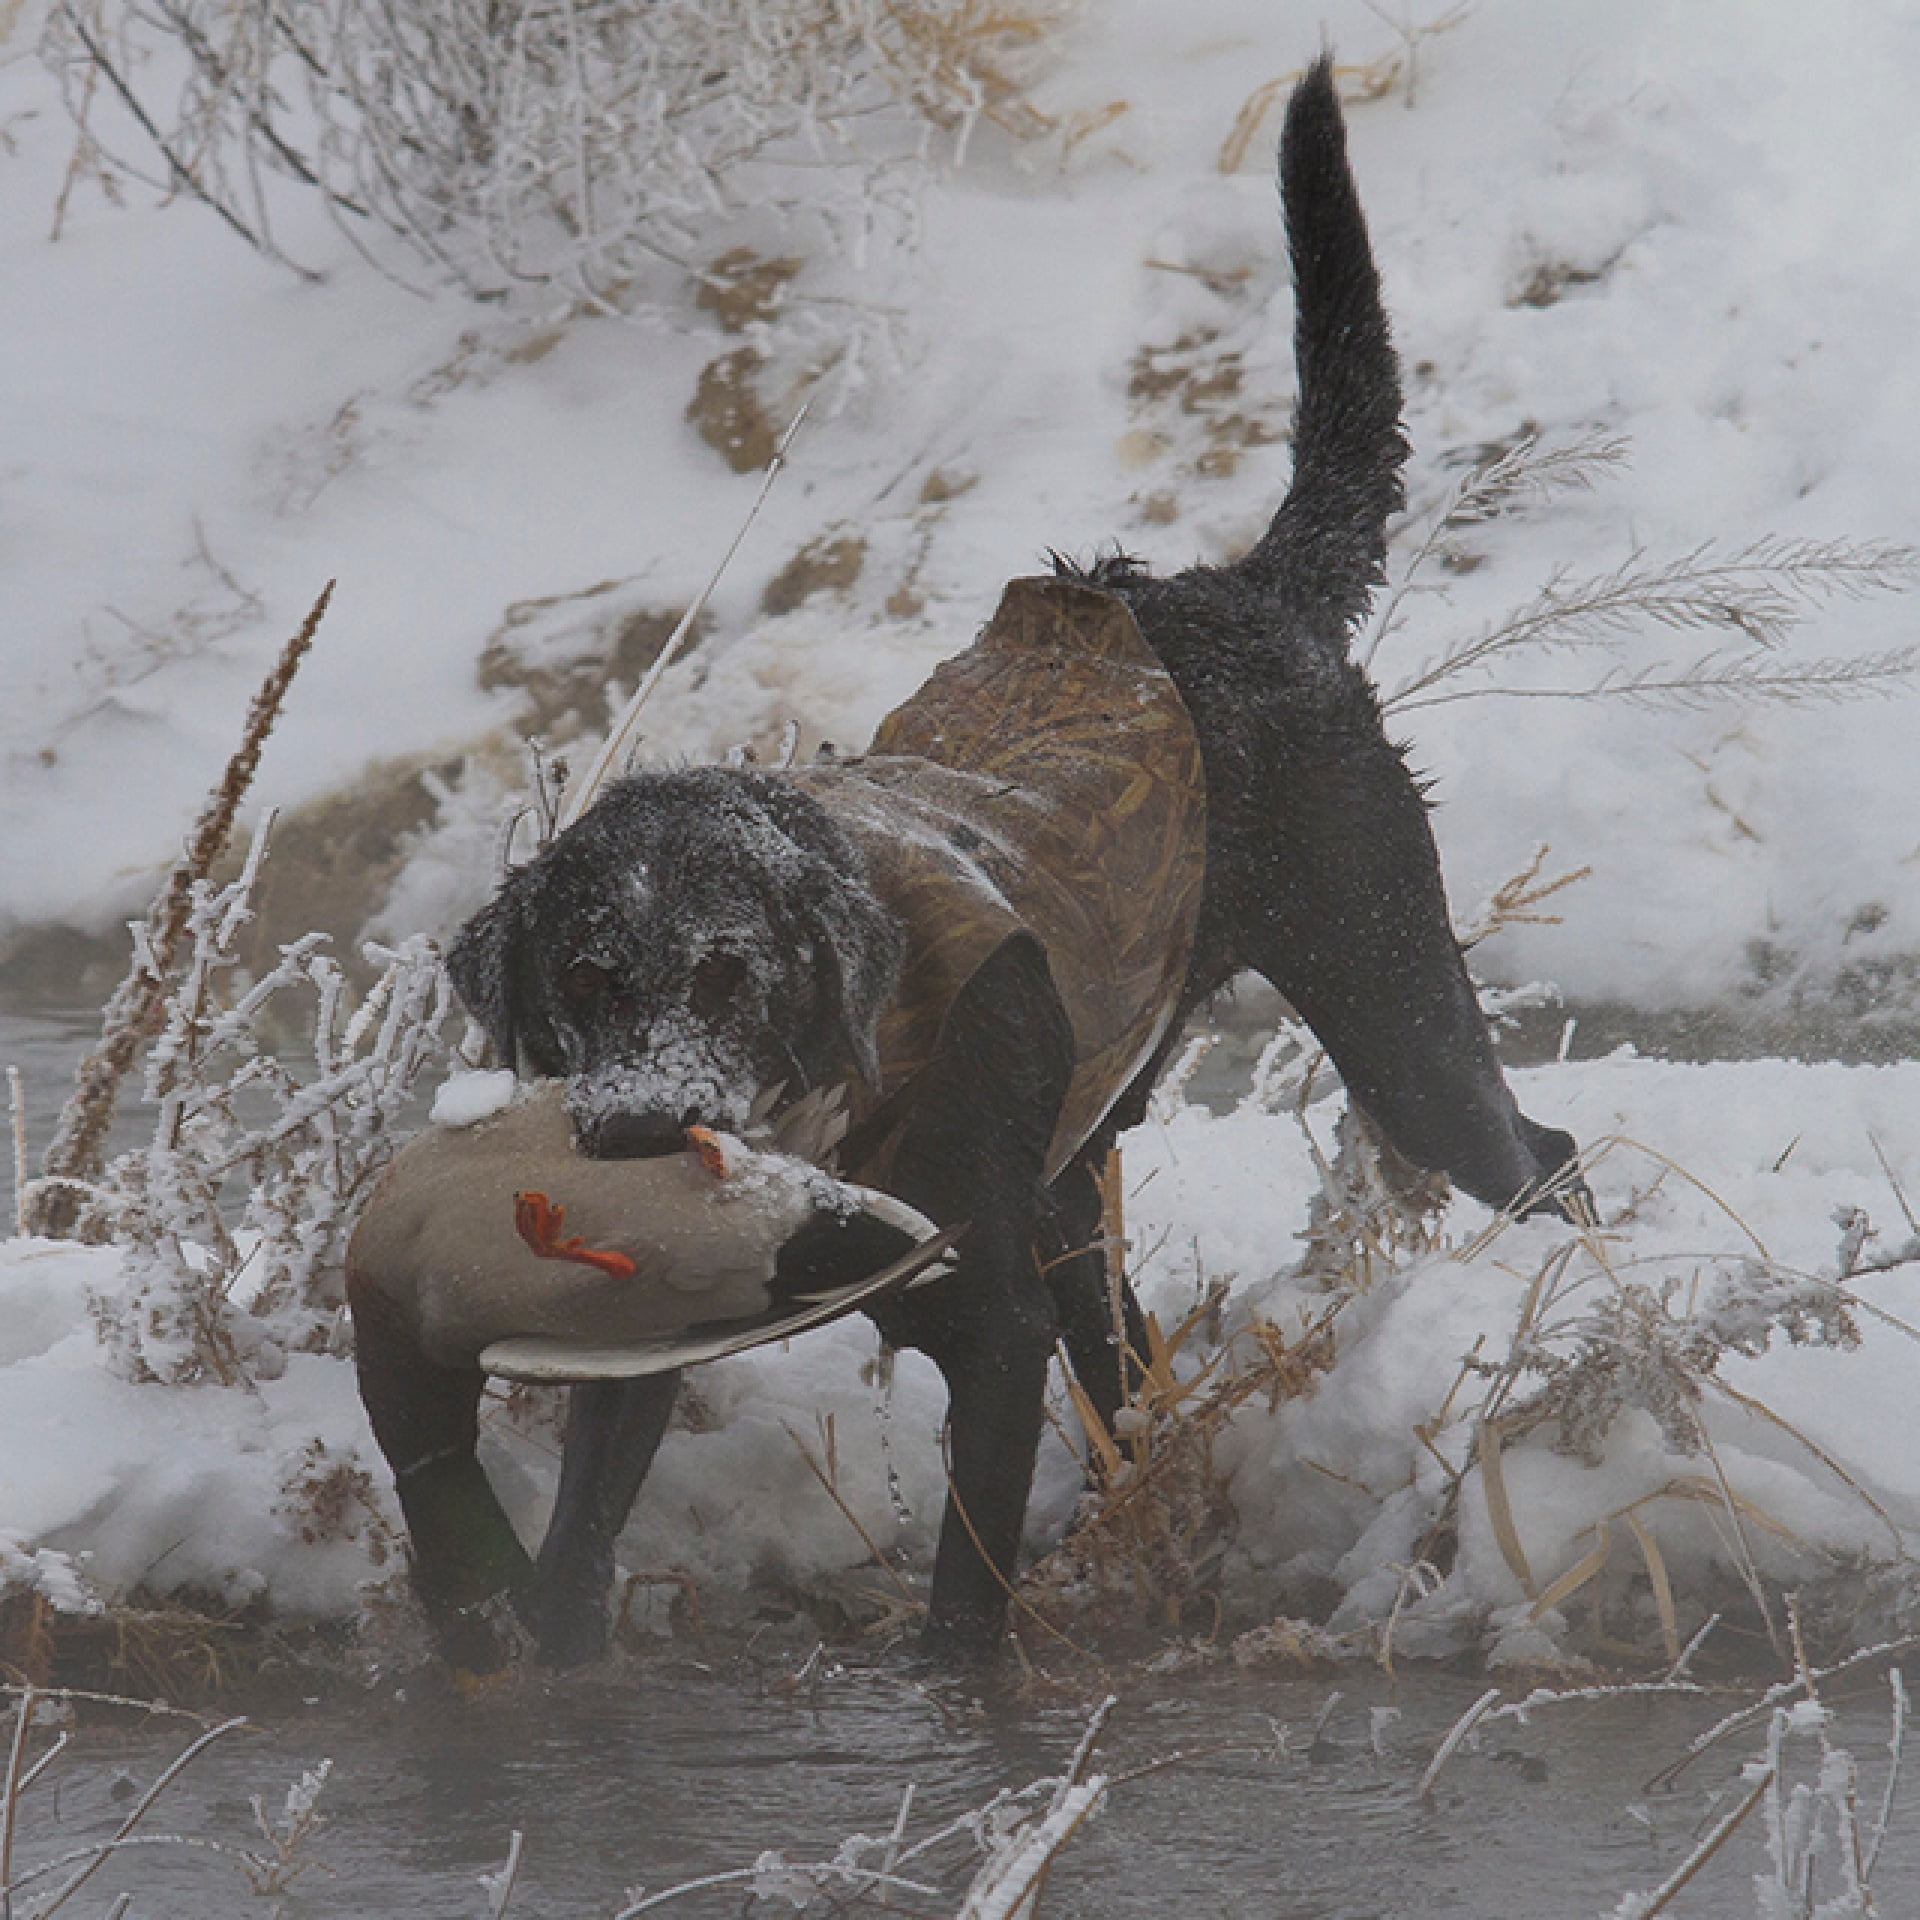 Hunting dog fetching duck